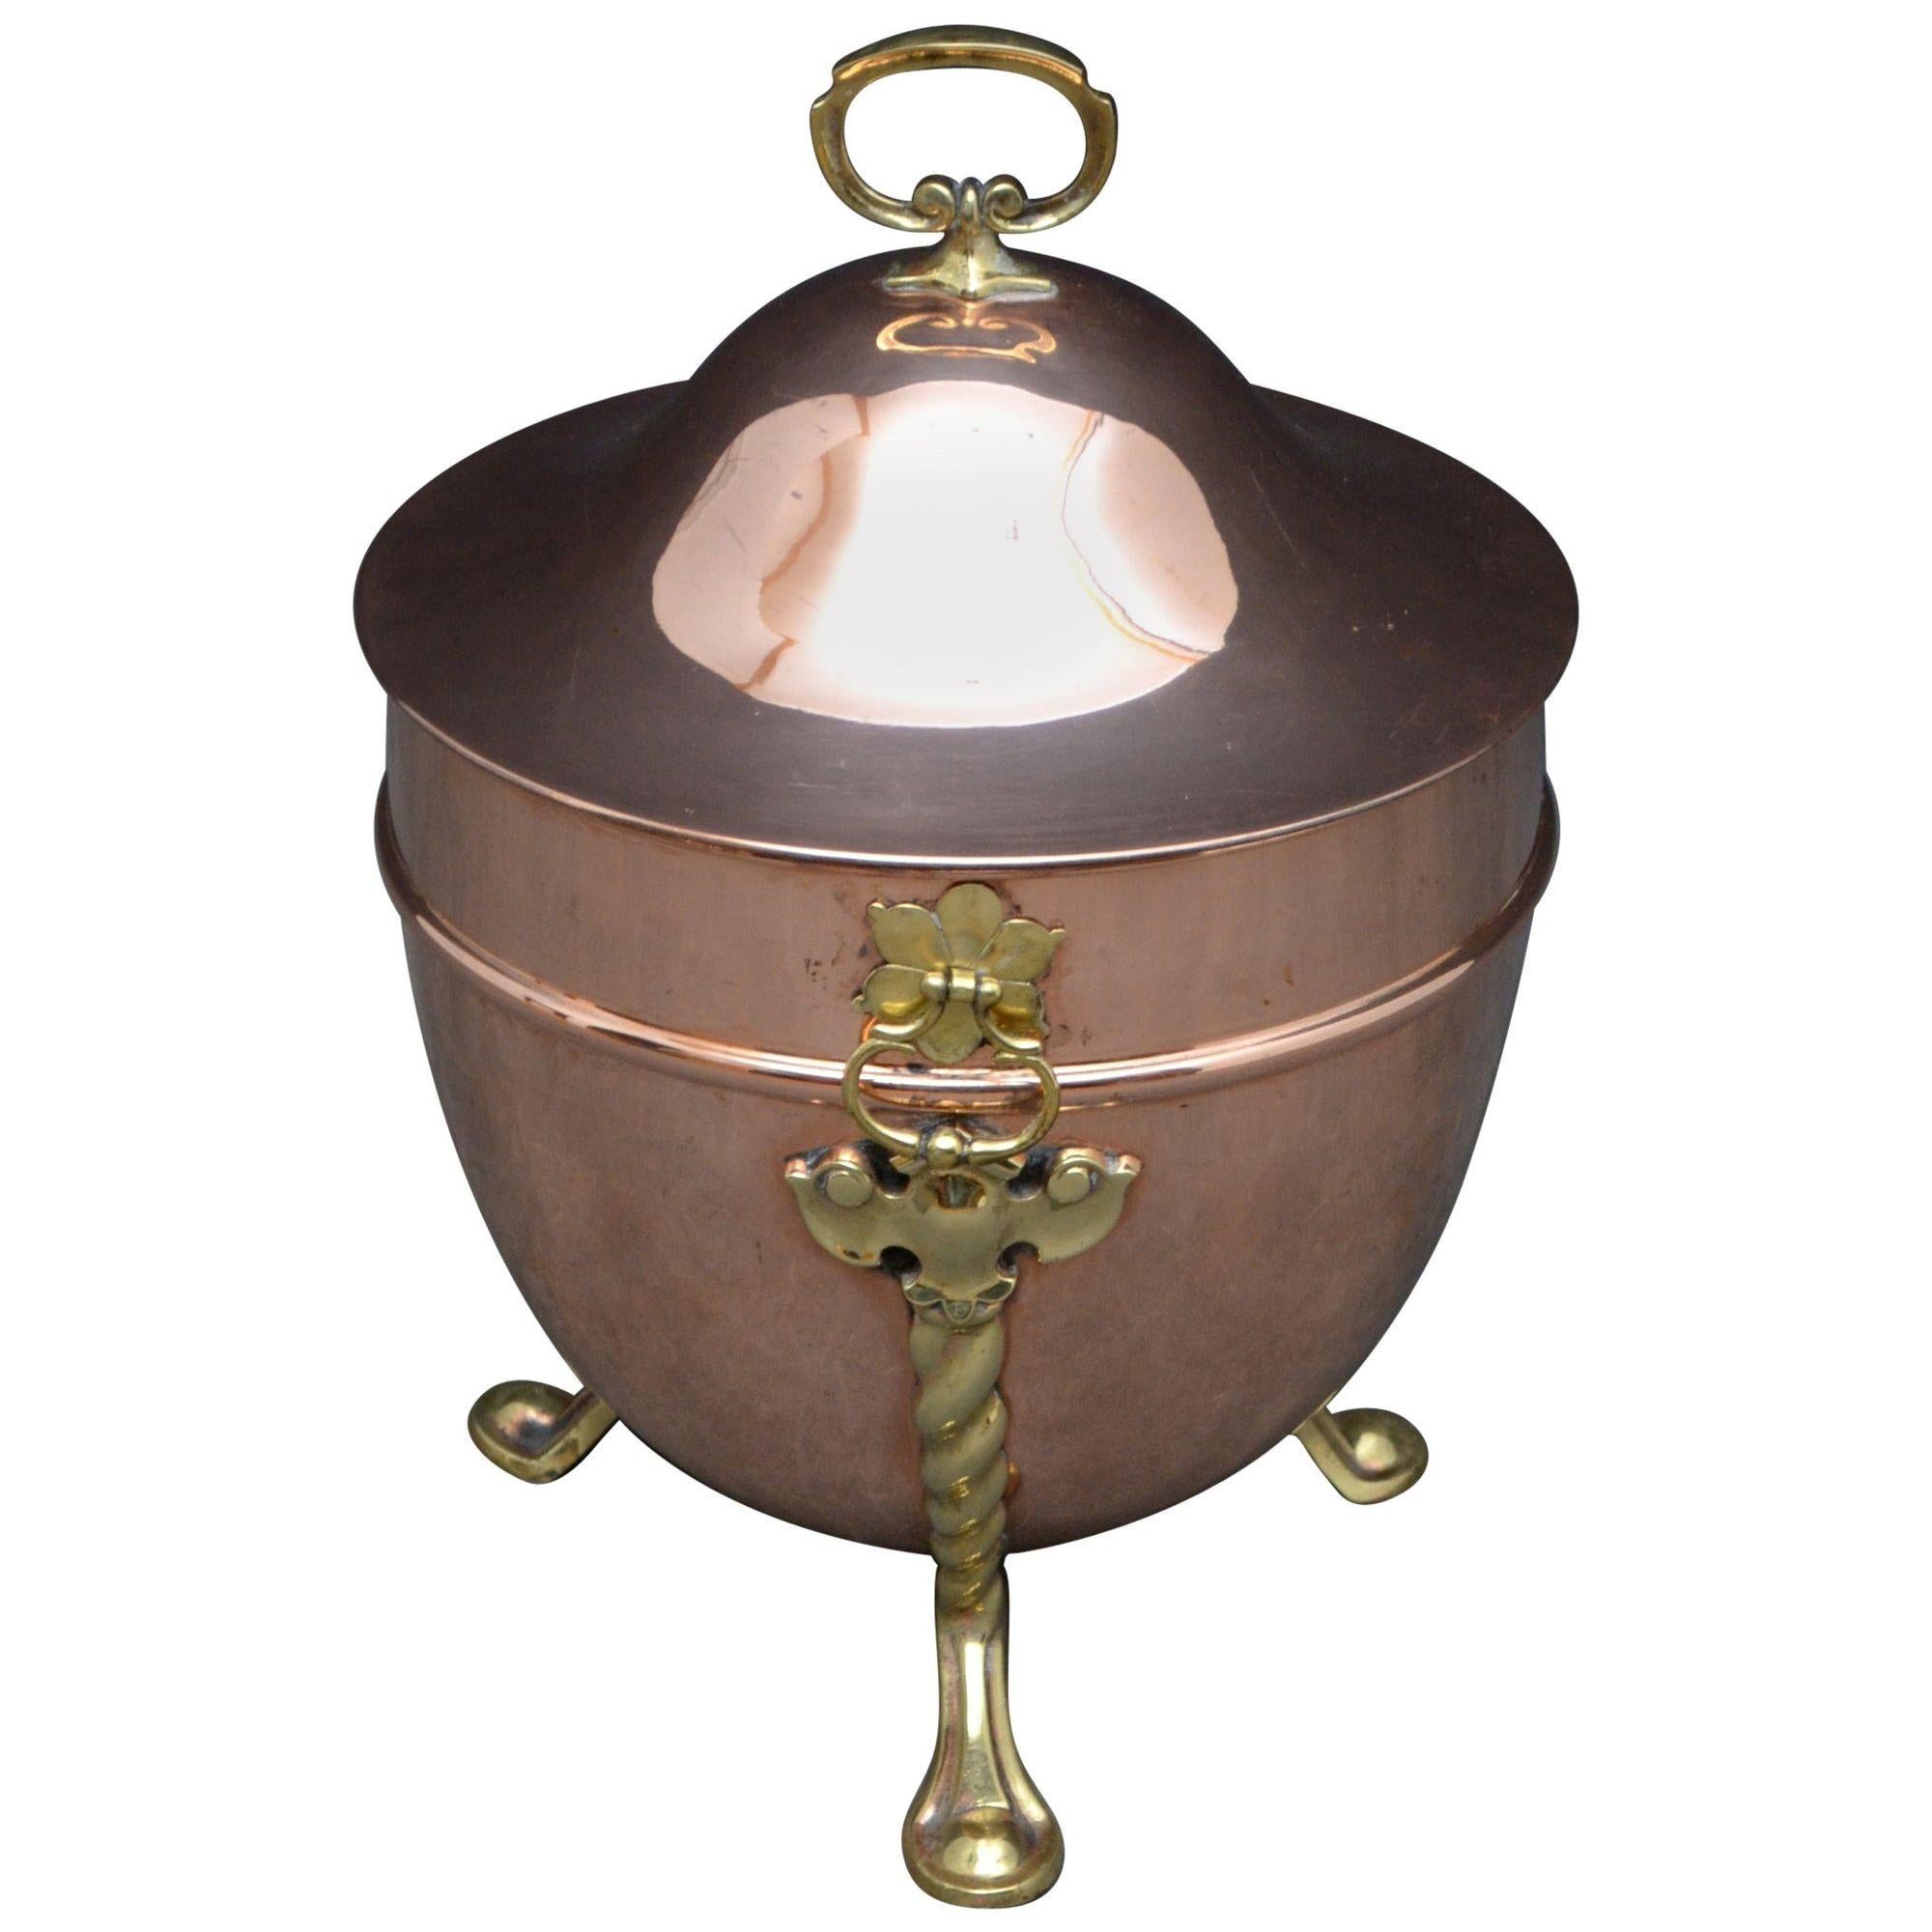 k0060 elegant Edwardian copper coal bin or planter, having lift up lif, 2 handles and 3 decorative legs. This planter has been clean and polished and is ready to place at home, circa 1900.
Measures: Height 17